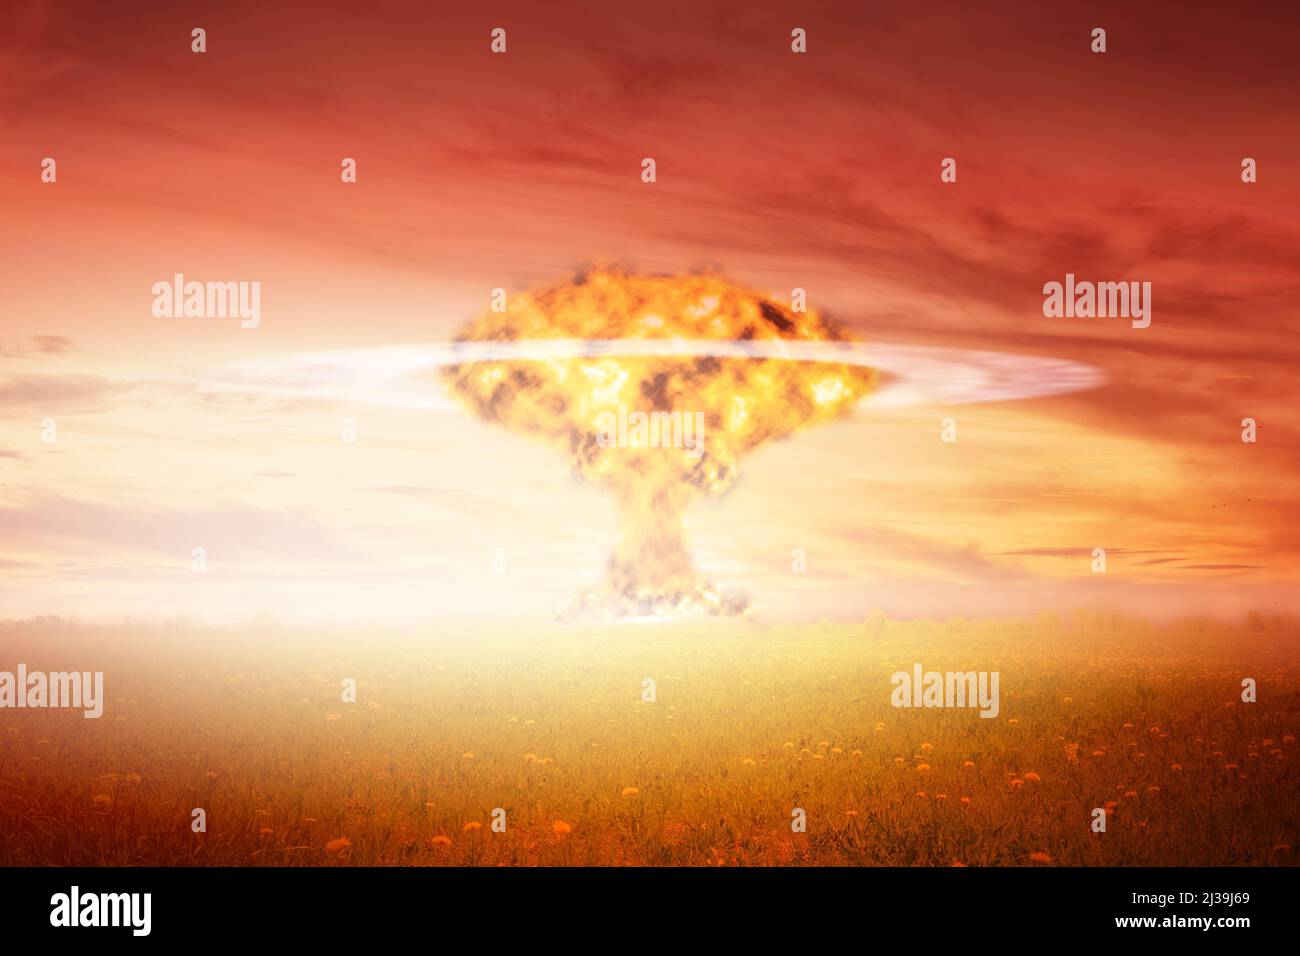 Nuclear explosion in the field. Nuclear threat and world war theme image Stock Photo